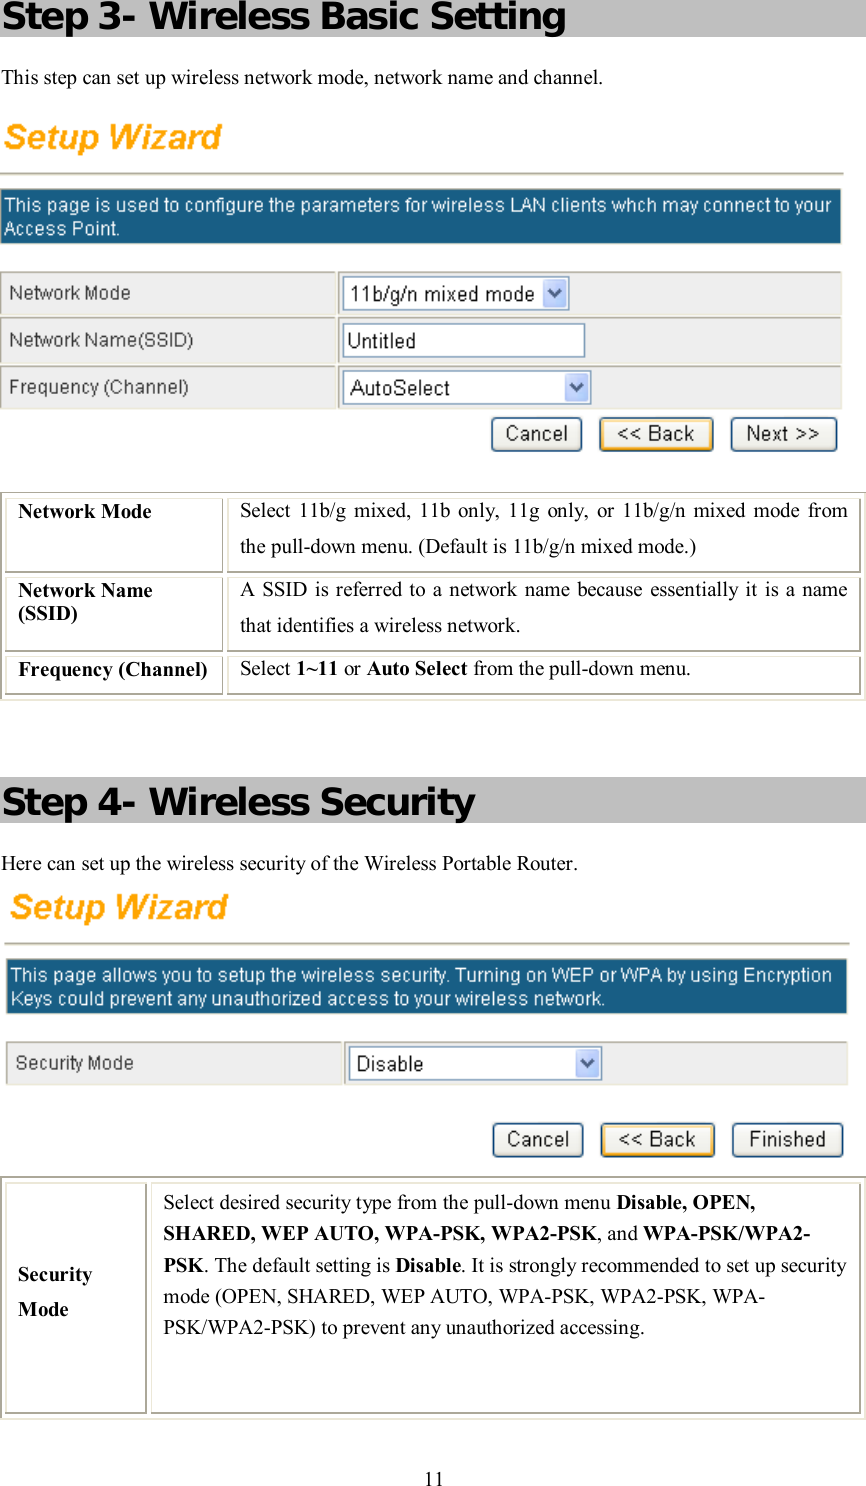    11 Step 3- Wireless Basic Setting This step can set up wireless network mode, network name and channel.  Network Mode  Select 11b/g mixed, 11b only, 11g only, or 11b/g/n mixed mode from the pull-down menu. (Default is 11b/g/n mixed mode.) Network Name (SSID) A SSID is referred to a network name because essentially it is a name that identifies a wireless network.  Frequency (Channel) Select 1~11 or Auto Select from the pull-down menu.   Step 4- Wireless Security Here can set up the wireless security of the Wireless Portable Router.  Security Mode Select desired security type from the pull-down menu Disable, OPEN, SHARED, WEP AUTO, WPA-PSK, WPA2-PSK, and WPA-PSK/WPA2-PSK. The default setting is Disable. It is strongly recommended to set up security mode (OPEN, SHARED, WEP AUTO, WPA-PSK, WPA2-PSK, WPA-PSK/WPA2-PSK) to prevent any unauthorized accessing.  